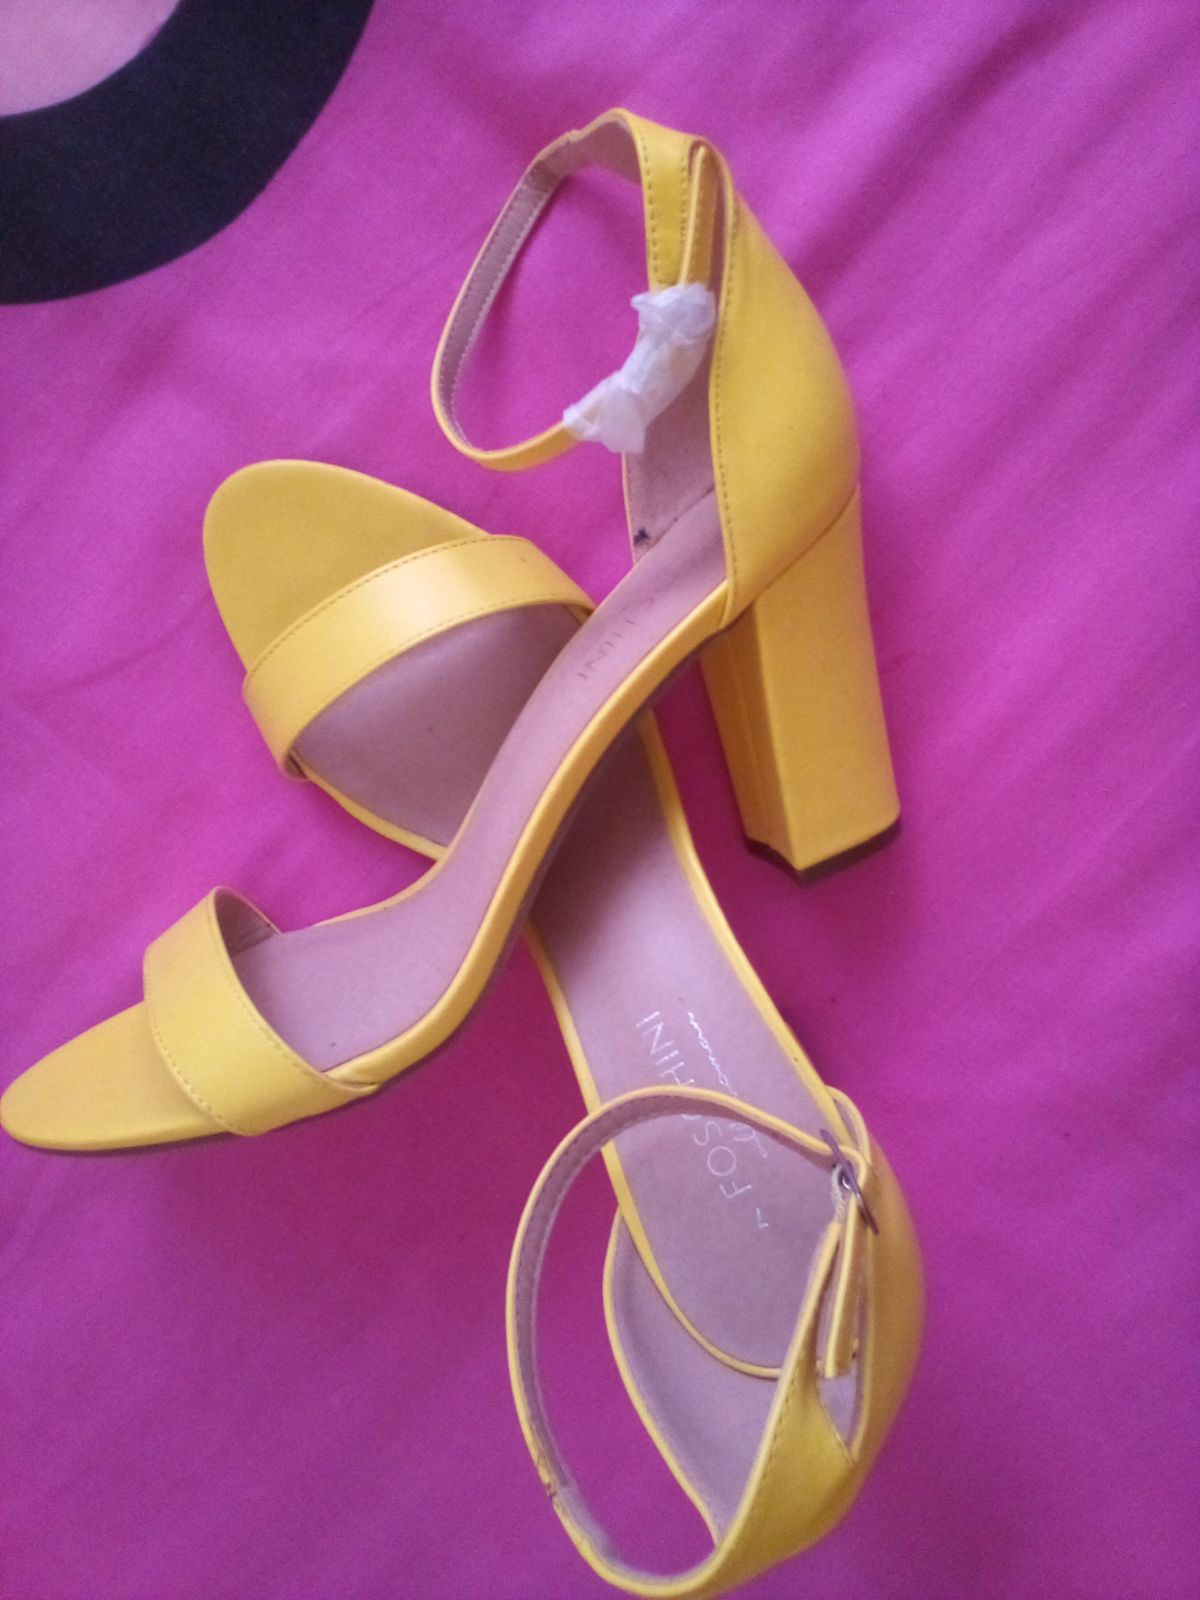 Bright yellow Un Bout 100 patent leather and PVC pumps | Christian  Louboutin | Christian louboutin, Cheap christian louboutin, Christian  louboutin shoes